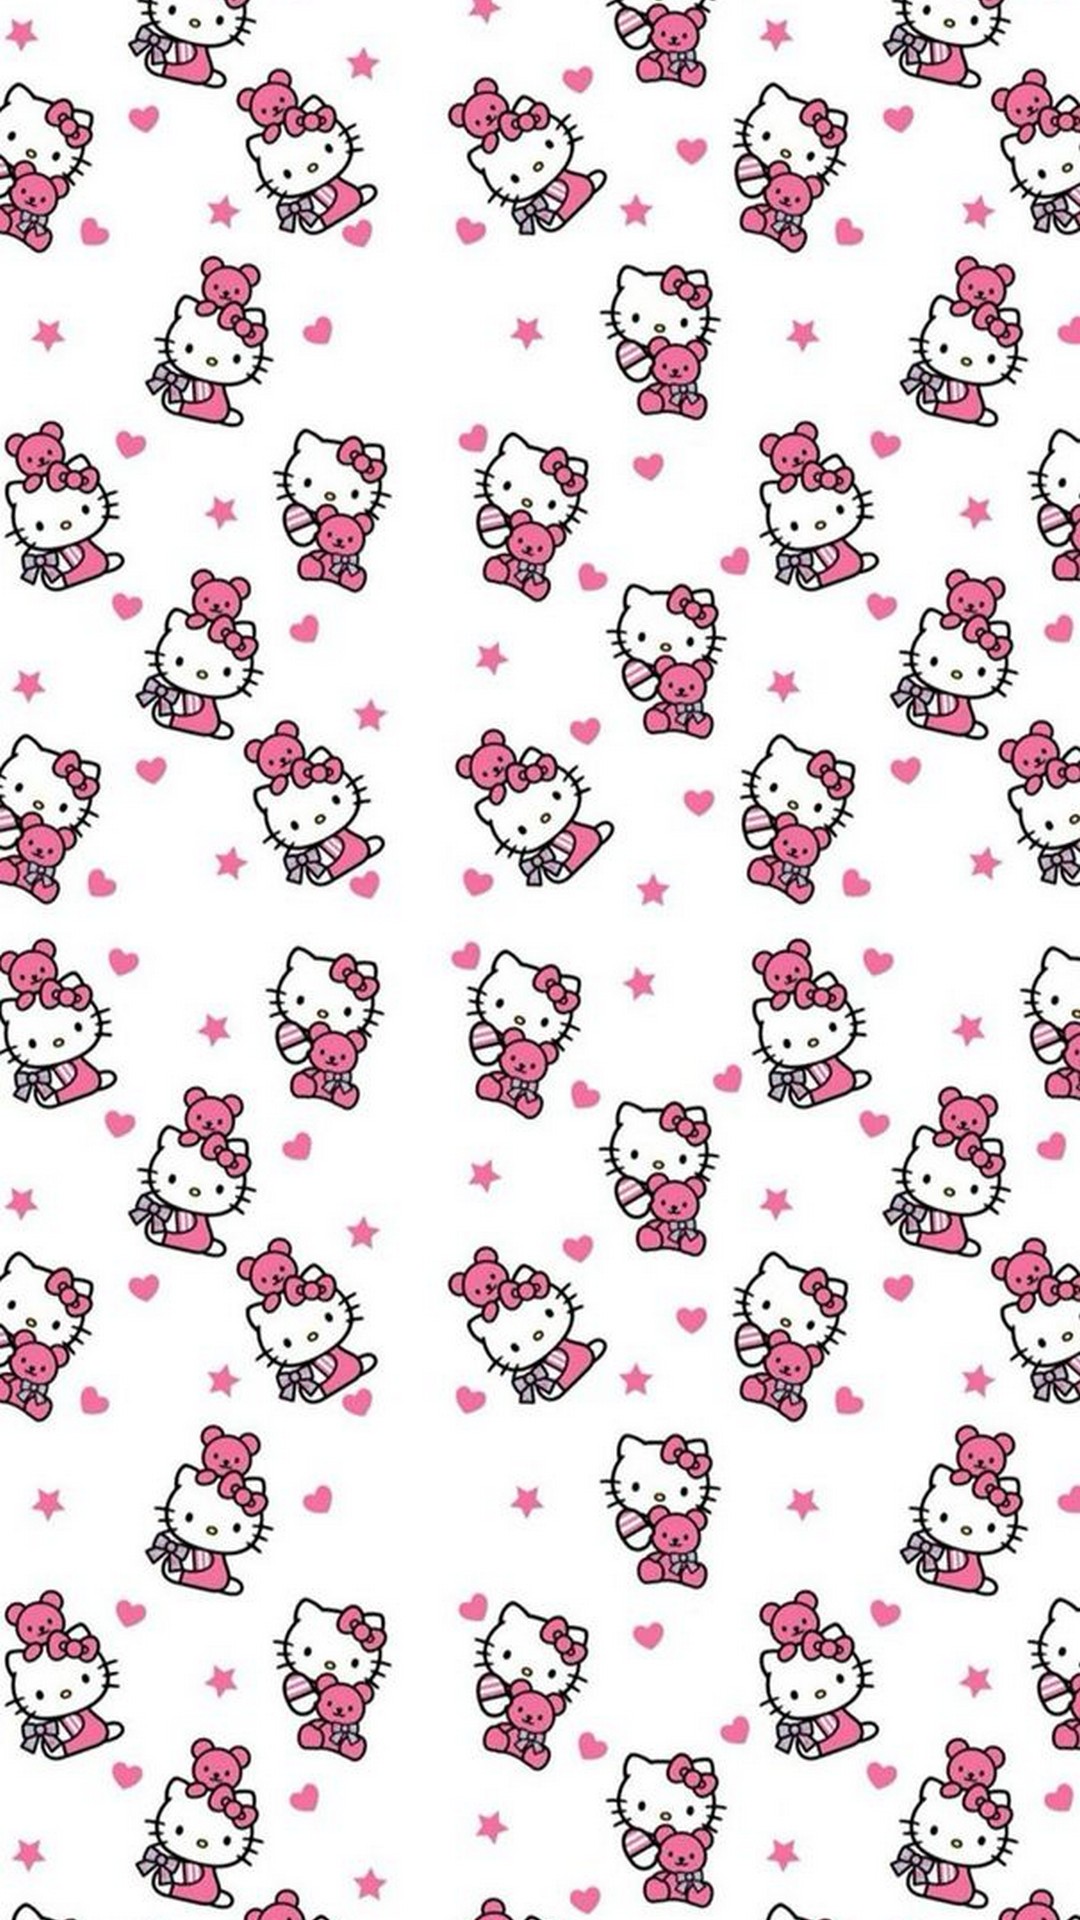 Wallpaper Hello Kitty Characters iPhone with resolution 1080X1920 pixel. You can make this wallpaper for your iPhone 5, 6, 7, 8, X backgrounds, Mobile Screensaver, or iPad Lock Screen